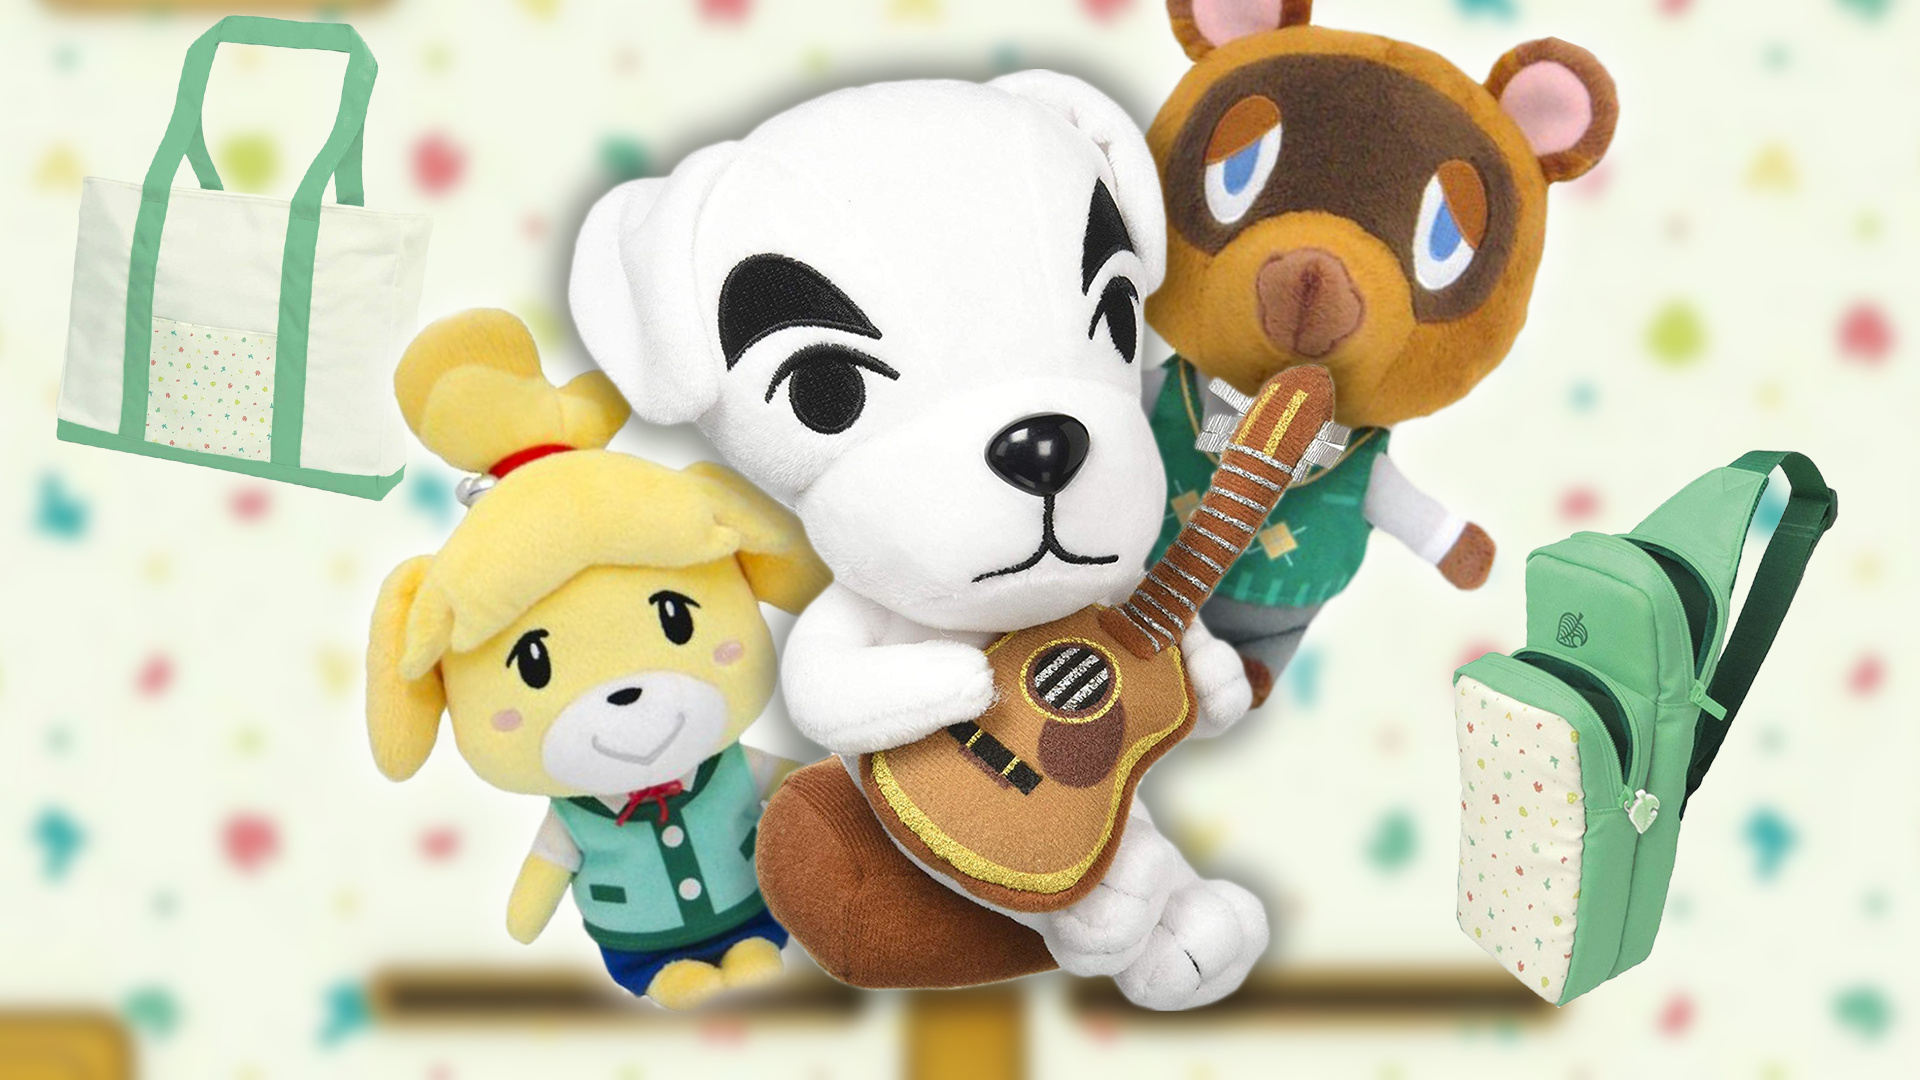 Get In The Mood For Animal Crossing: New Horizons With This Adorable